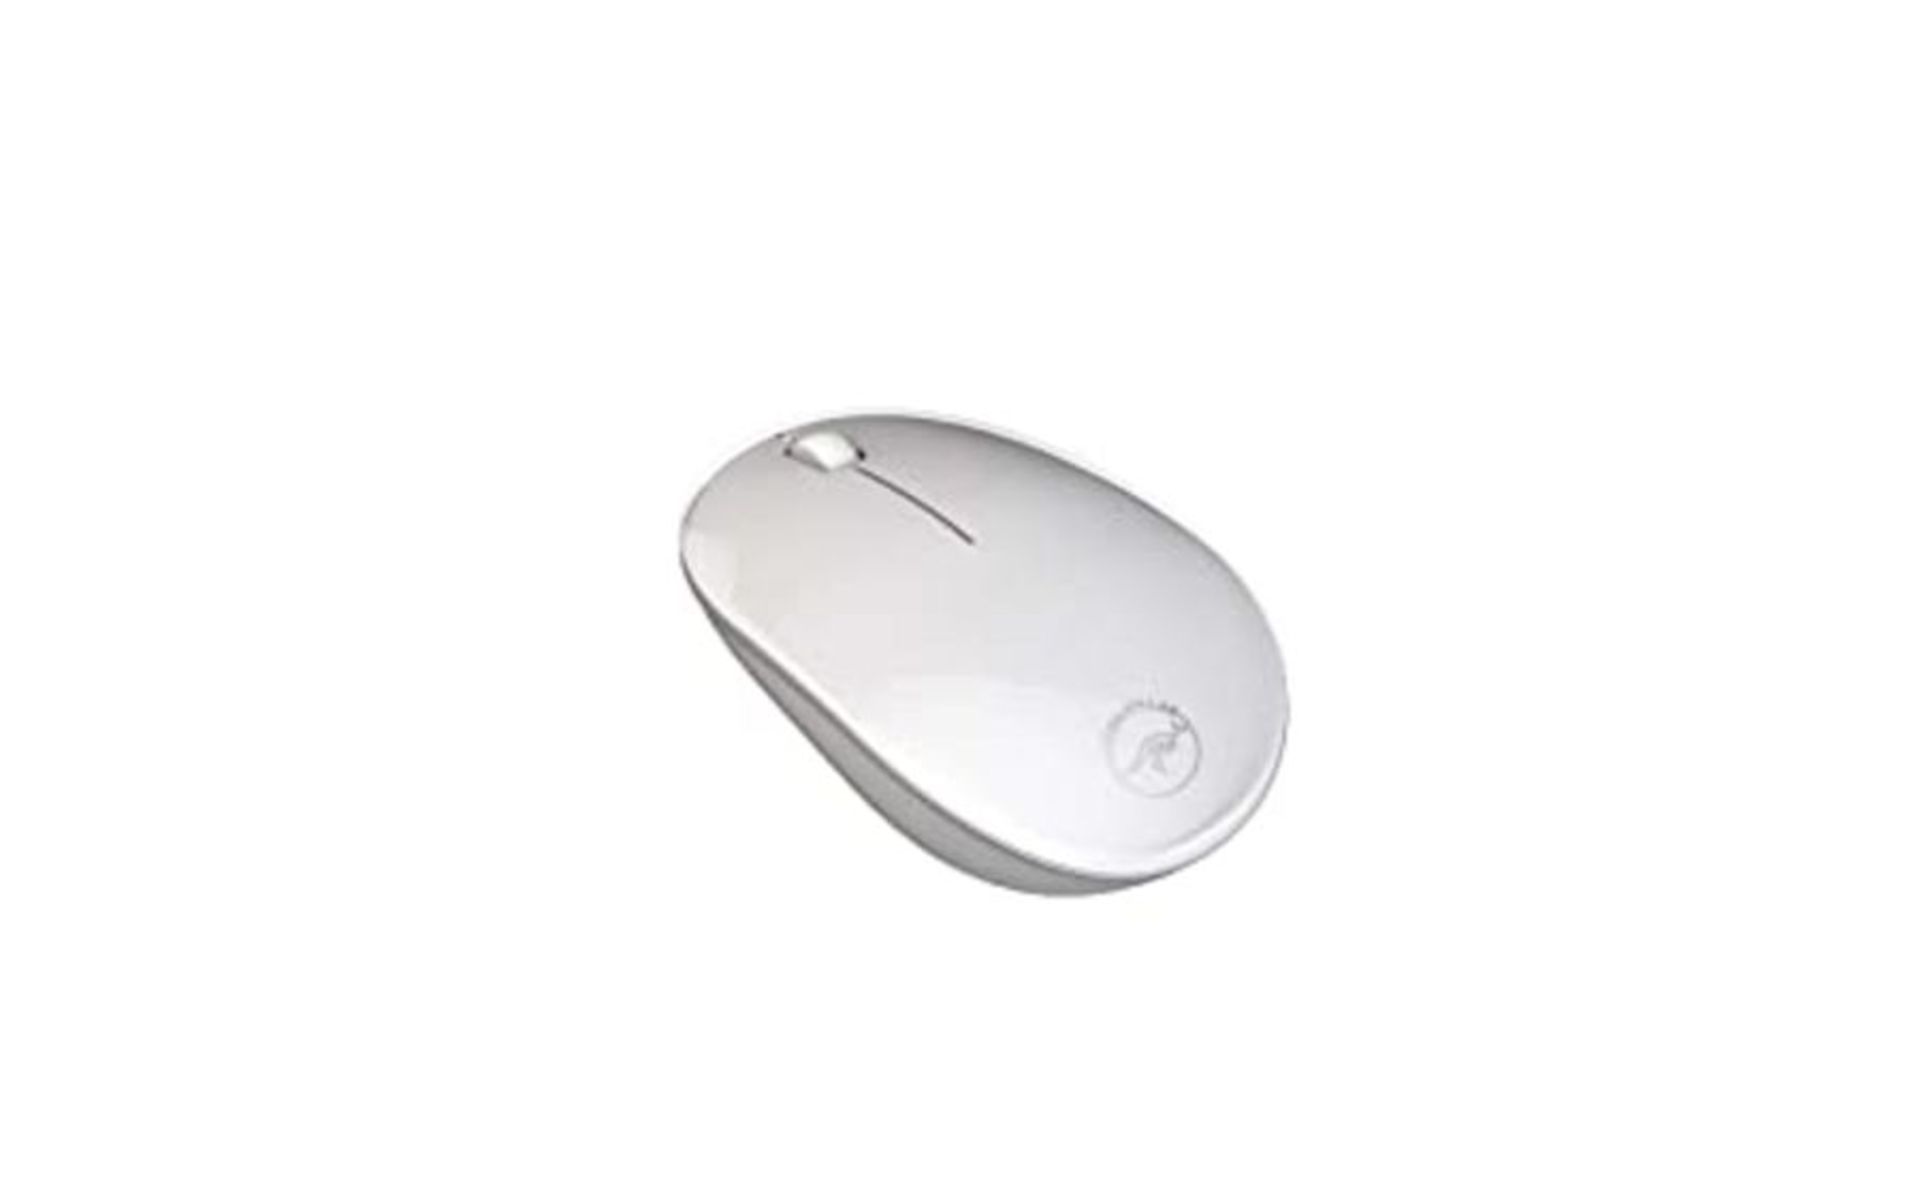 Mobility Lab ML301877 Bluetooth Laser Mouse 1600 DPI for Mac and PC - White